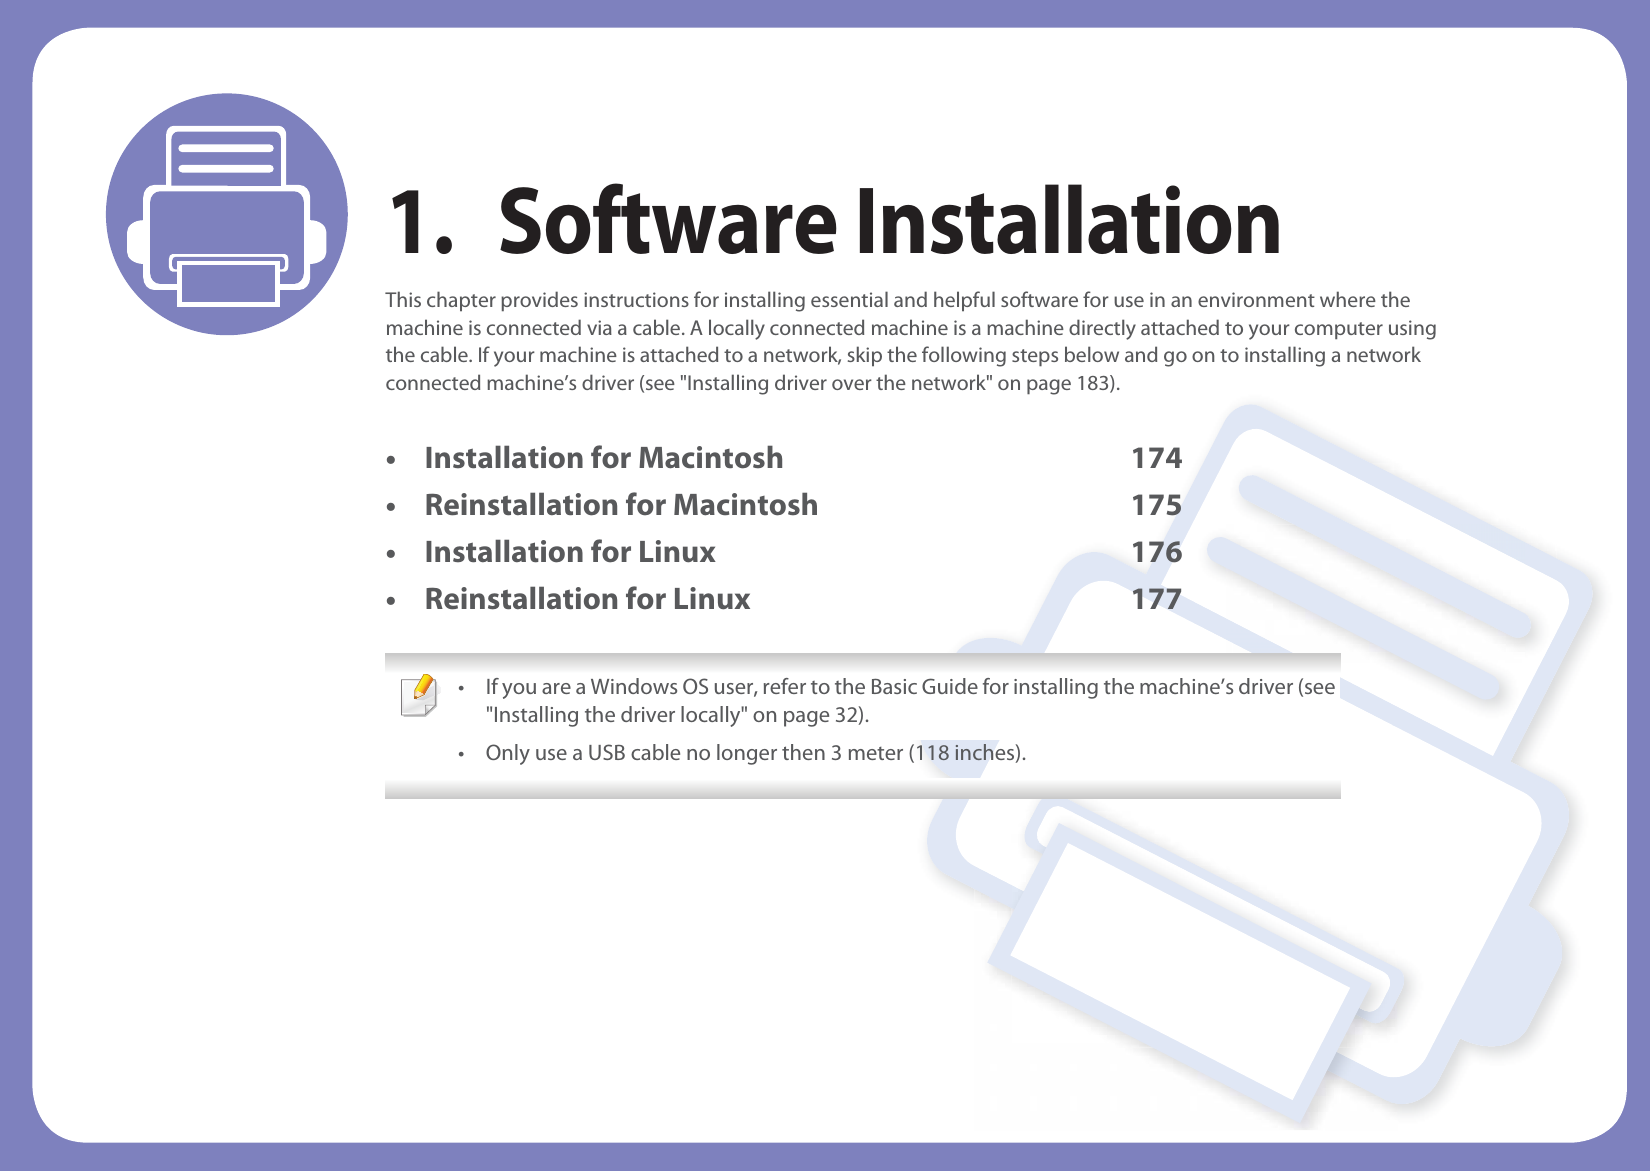 1. Software InstallationThis chapter provides instructions for installing essential and helpful software for use in an environment where the machine is connected via a cable. A locally connected machine is a machine directly attached to your computer using the cable. If your machine is attached to a network, skip the following steps below and go on to installing a network connected machine’s driver (see &quot;Installing driver over the network&quot; on page 183).• Installation for Macintosh 174• Reinstallation for Macintosh 175• Installation for Linux 176• Reinstallation for Linux 177 • If you are a Windows OS user, refer to the Basic Guide for installing the machine’s driver (see &quot;Installing the driver locally&quot; on page 32).• Only use a USB cable no longer then 3 meter (118 inches). 